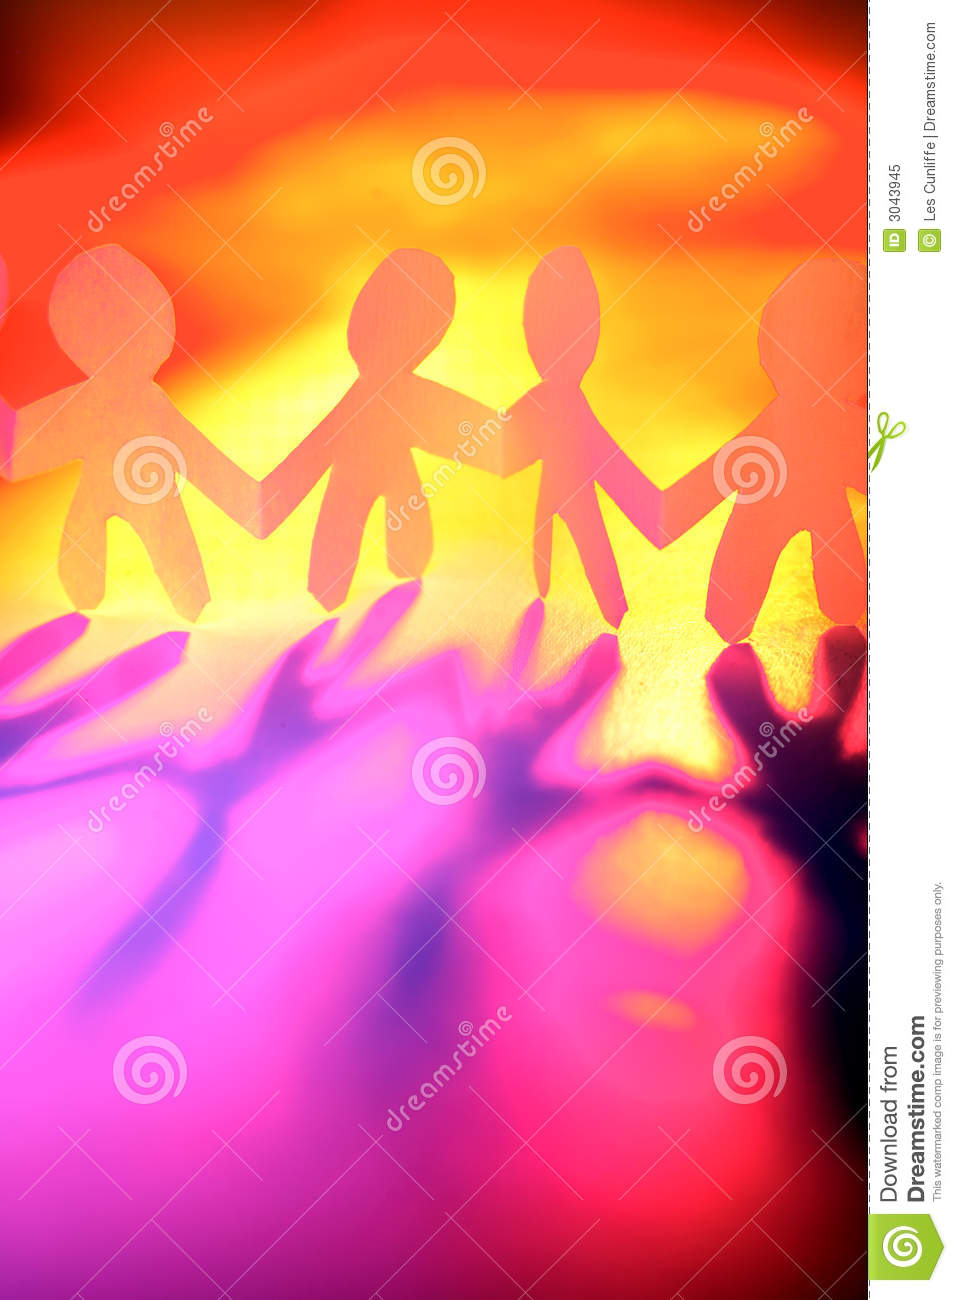 Line Of Four Paper Doll Cutout Figures Holding Hands With A Colorful